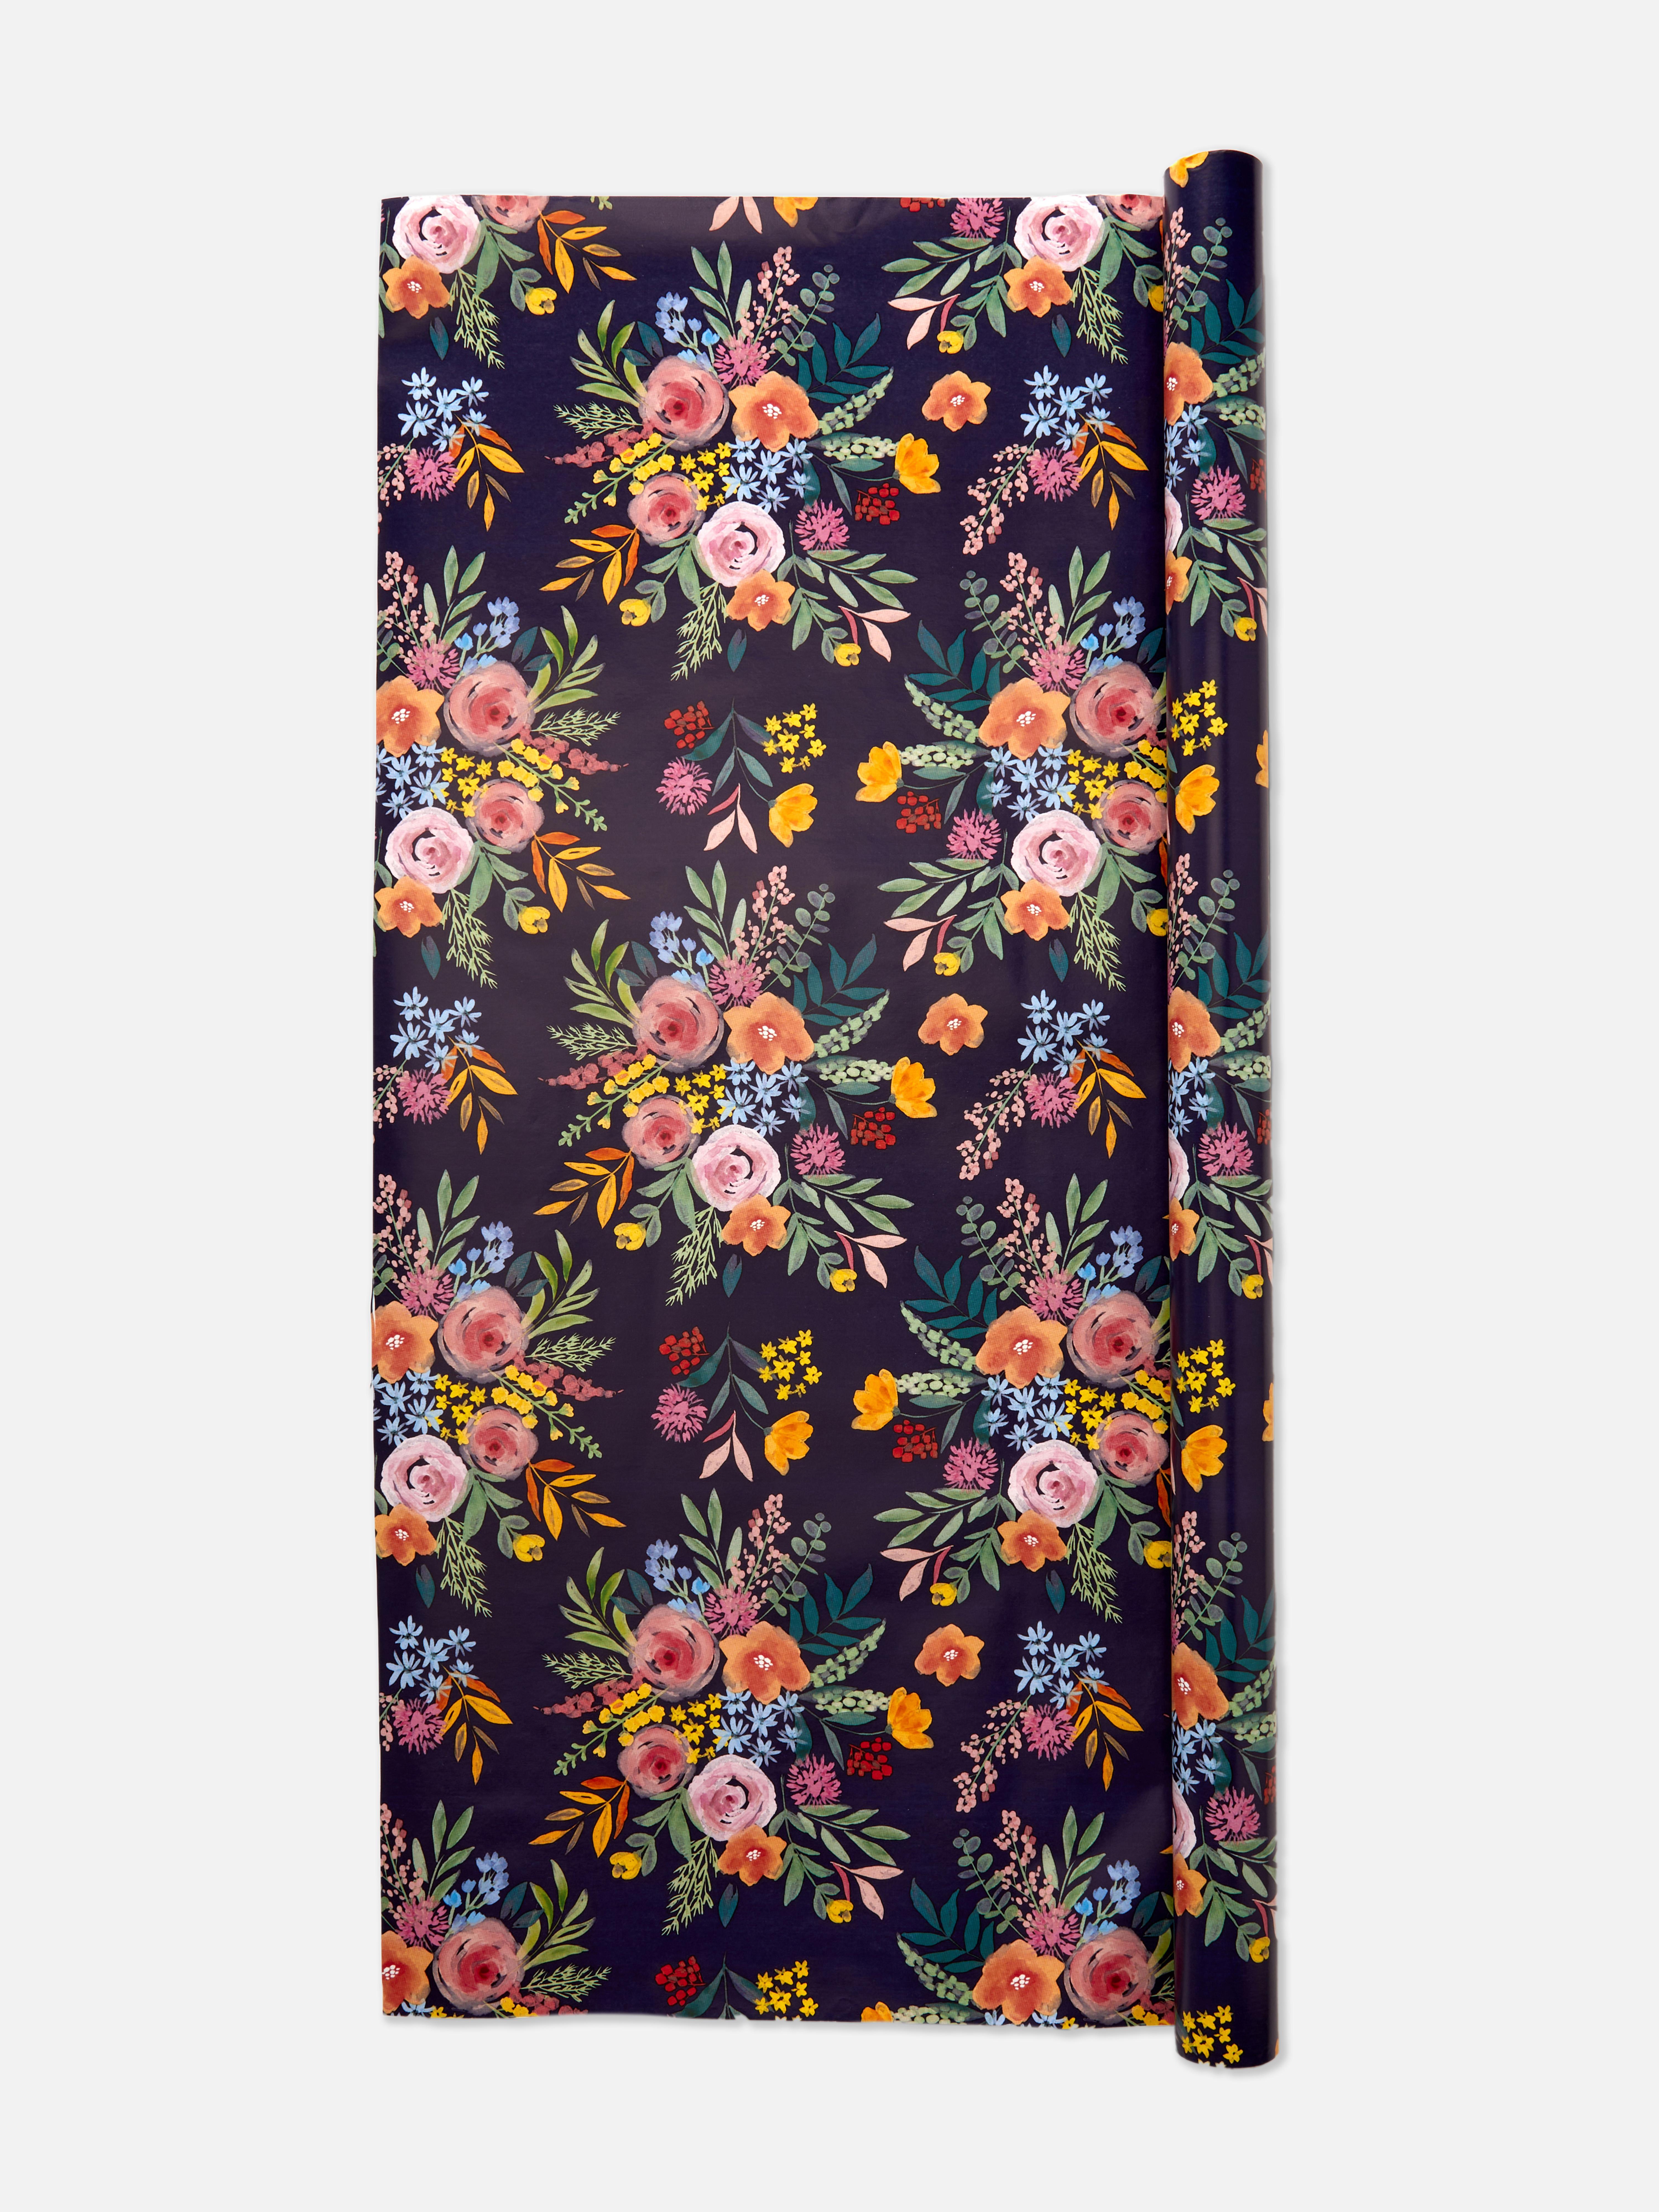 6M Dark Floral Wrapping Paper